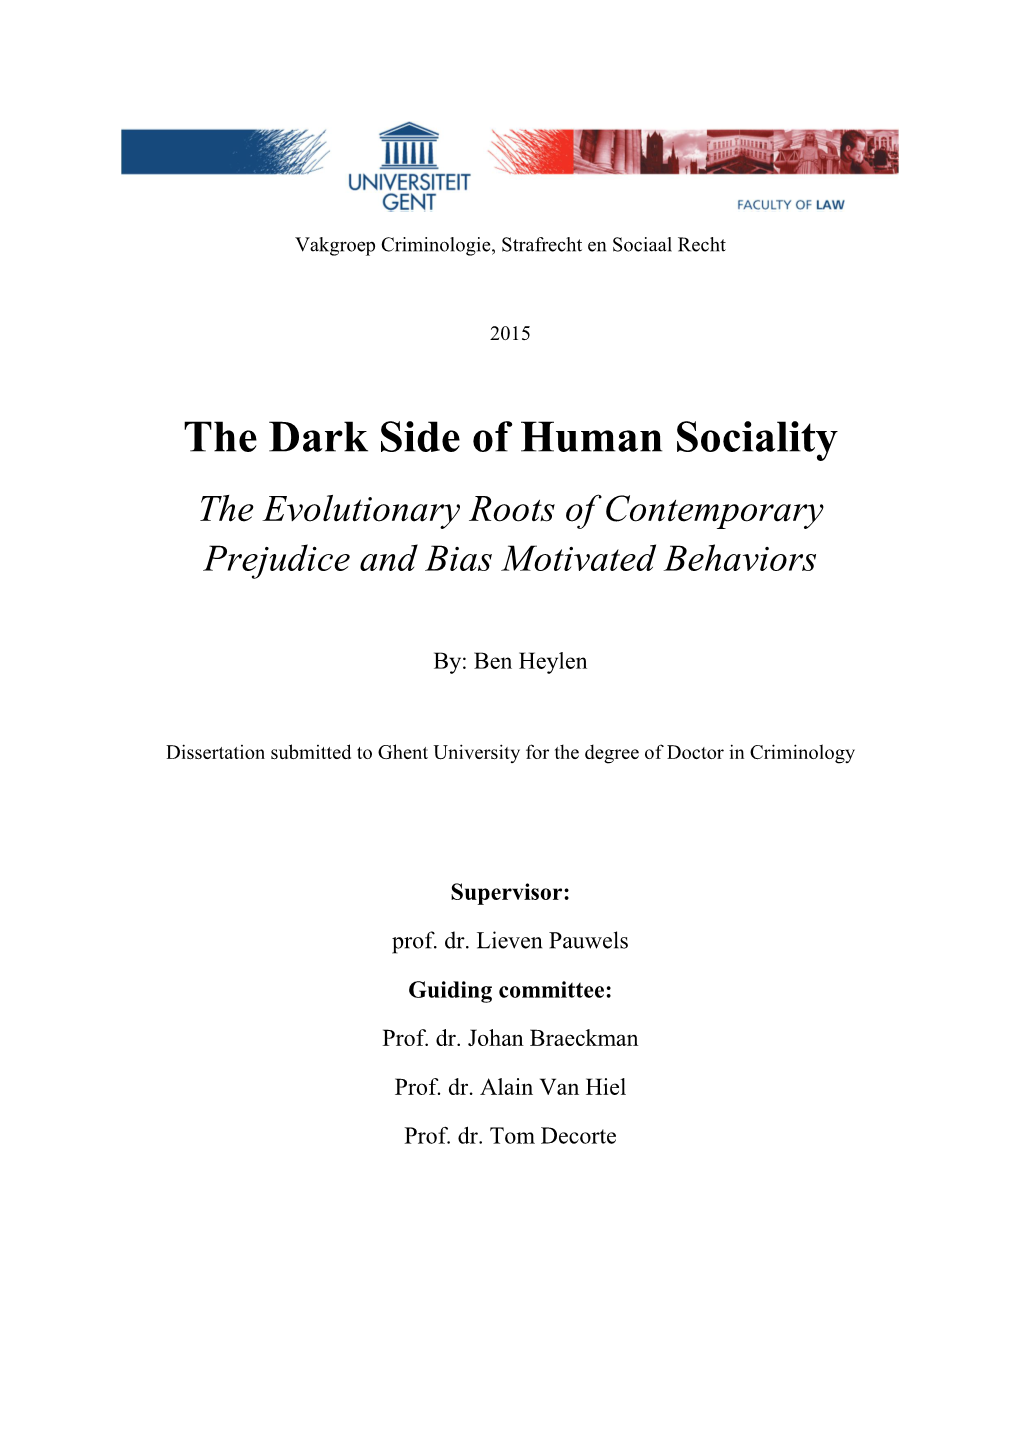 The Dark Side of Human Sociality the Evolutionary Roots of Contemporary Prejudice and Bias Motivated Behaviors